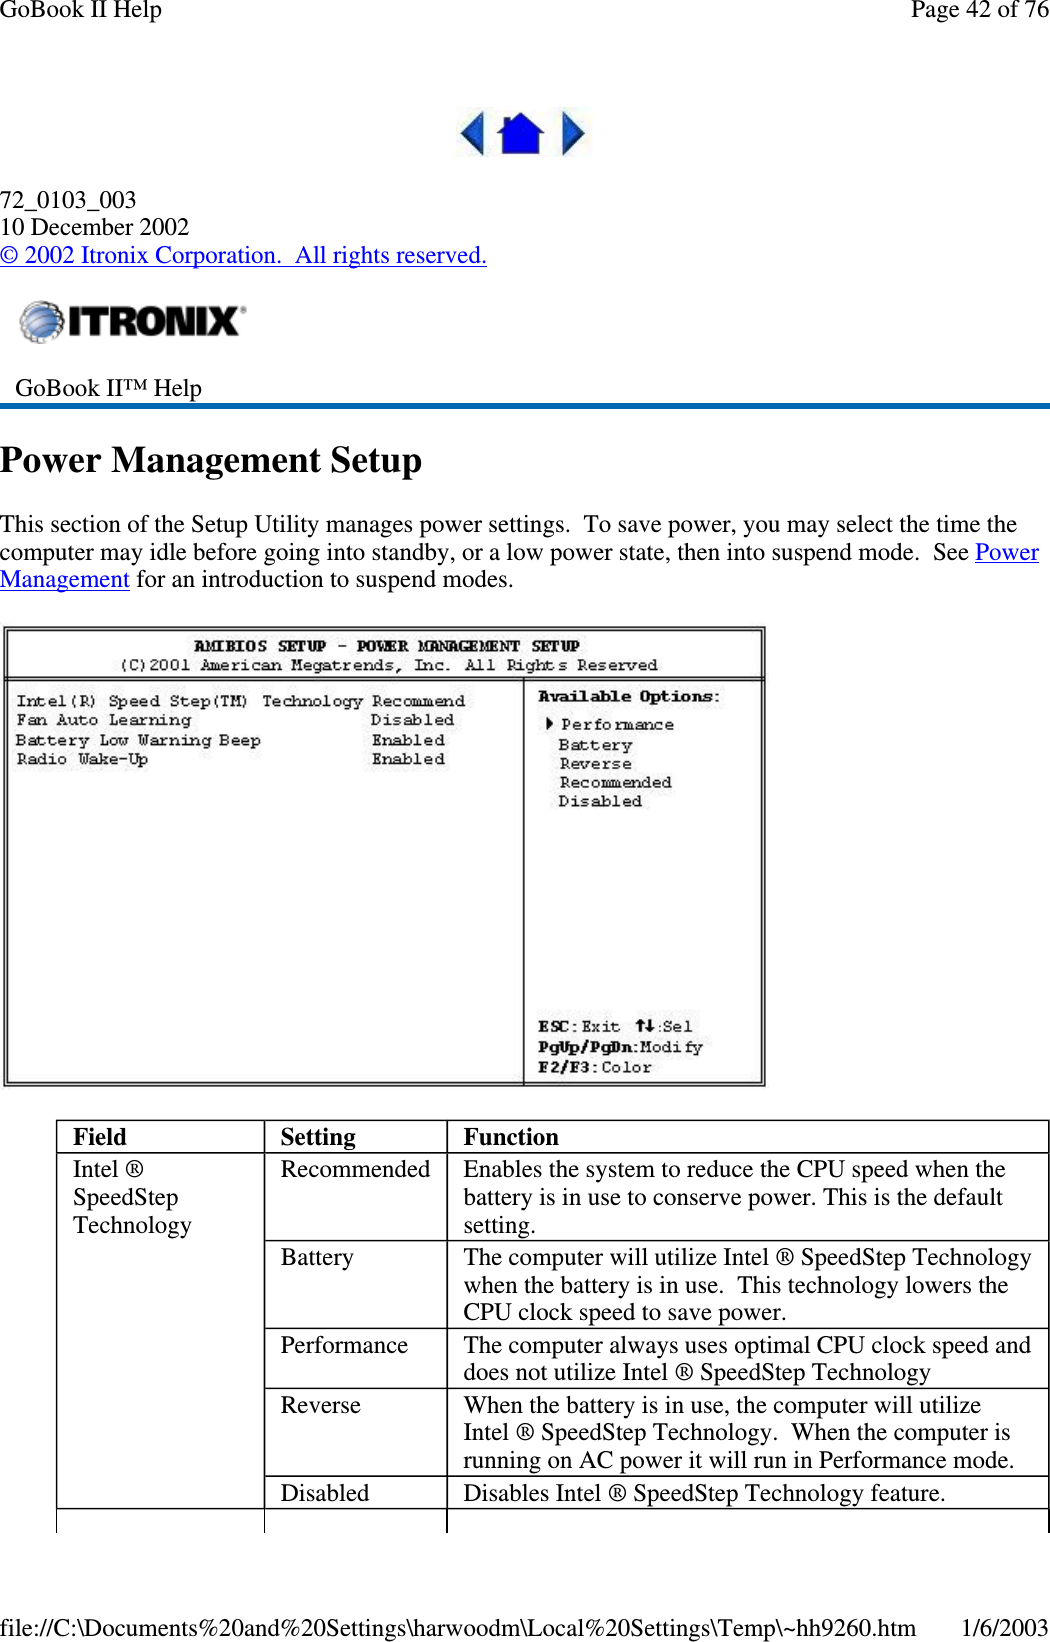 72_0103_00310 December 2002©2002 Itronix Corporation. All rights reserved.Power Management SetupThis section of the Setup Utility manages power settings. To save power, you may select the time thecomputer may idle before going into standby, or a low power state, then into suspend mode. See PowerManagement for an introduction to suspend modes.GoBook II™ HelpField Setting FunctionIntel ®SpeedStepTechnologyRecommended Enables the system to reduce the CPU speed when thebattery is in use to conserve power. This is the defaultsetting.Battery The computer will utilize Intel ® SpeedStep Technologywhen the battery is in use. This technology lowers theCPU clock speed to save power.Performance The computer always uses optimal CPU clock speed anddoes not utilize Intel ® SpeedStep TechnologyReverse When the battery is in use, the computer will utilizeIntel ® SpeedStep Technology. When the computer isrunning on AC power it will run in Performance mode.Disabled Disables Intel ® SpeedStep Technology feature.Page42of76GoBook II Help1/6/2003file://C:\Documents%20and%20Settings\harwoodm\Local%20Settings\Temp\~hh9260.htm